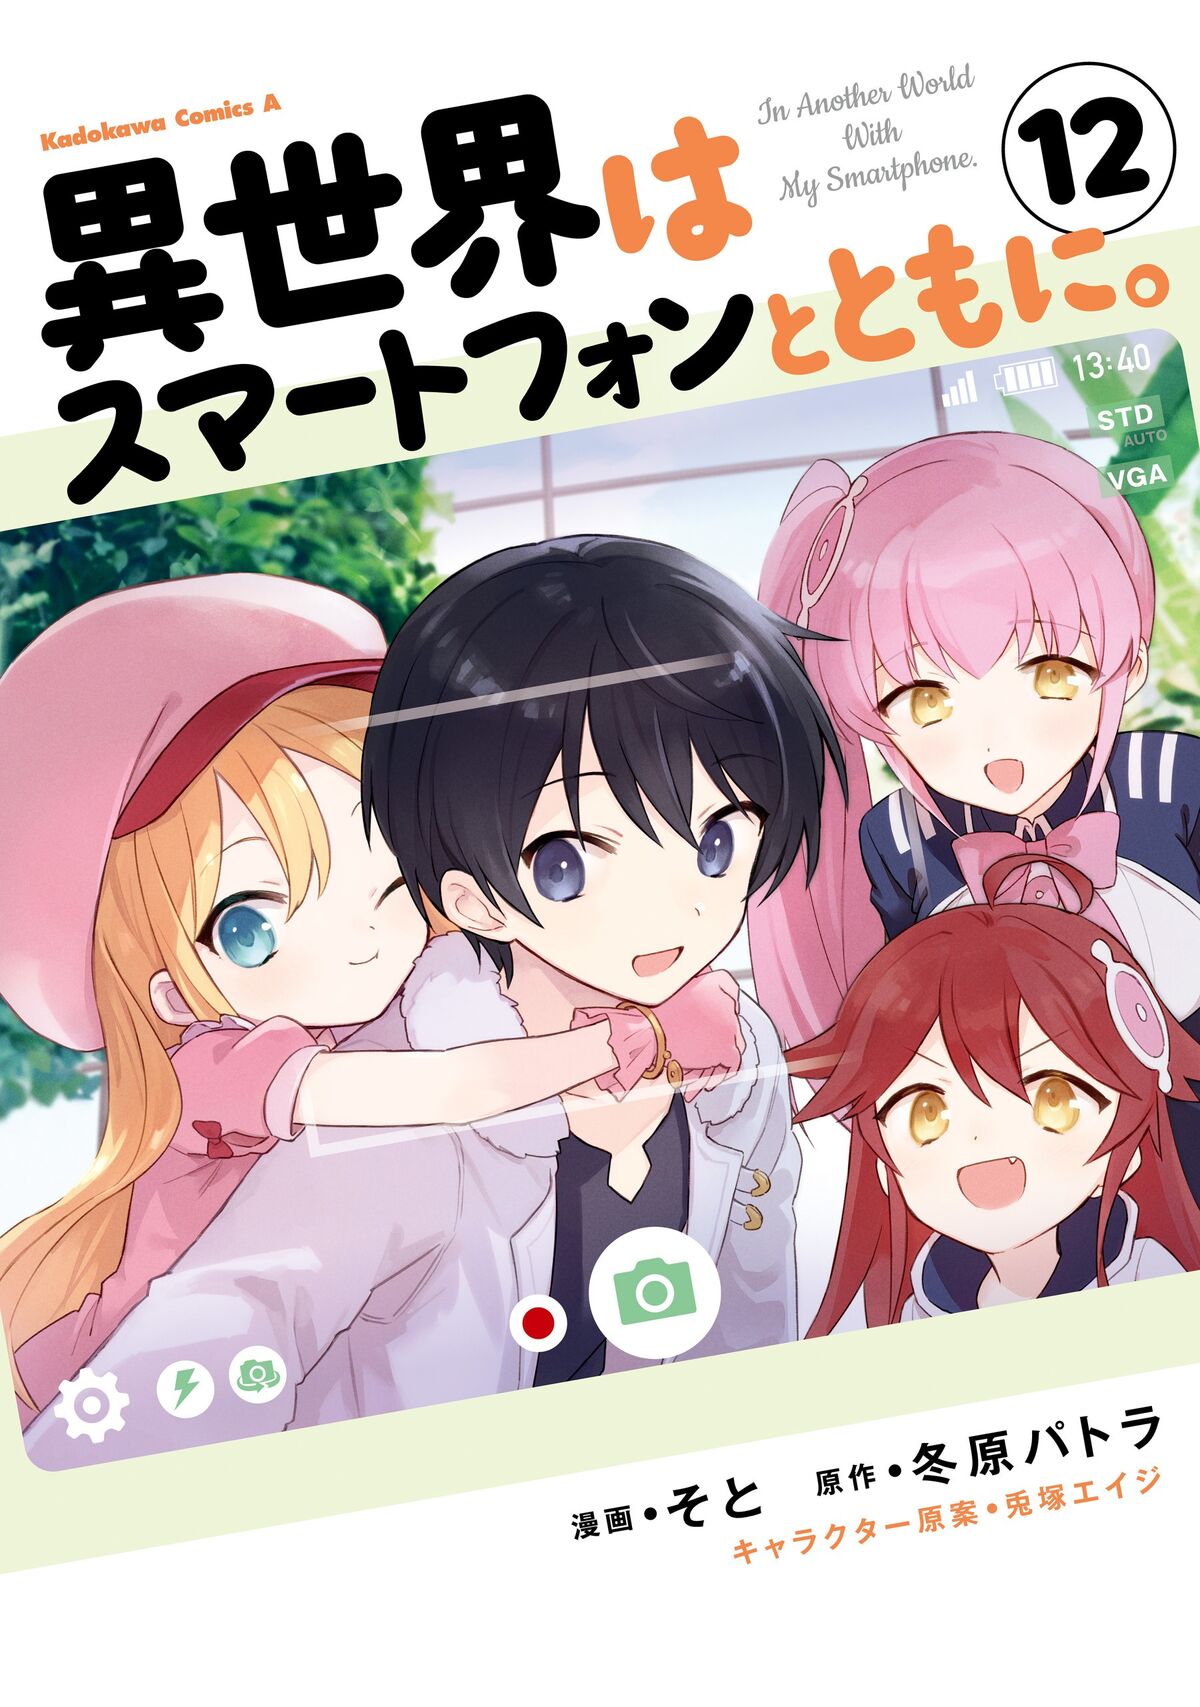 In Another World With My Smartphone: Volume 9 by Patora Fuyuhara